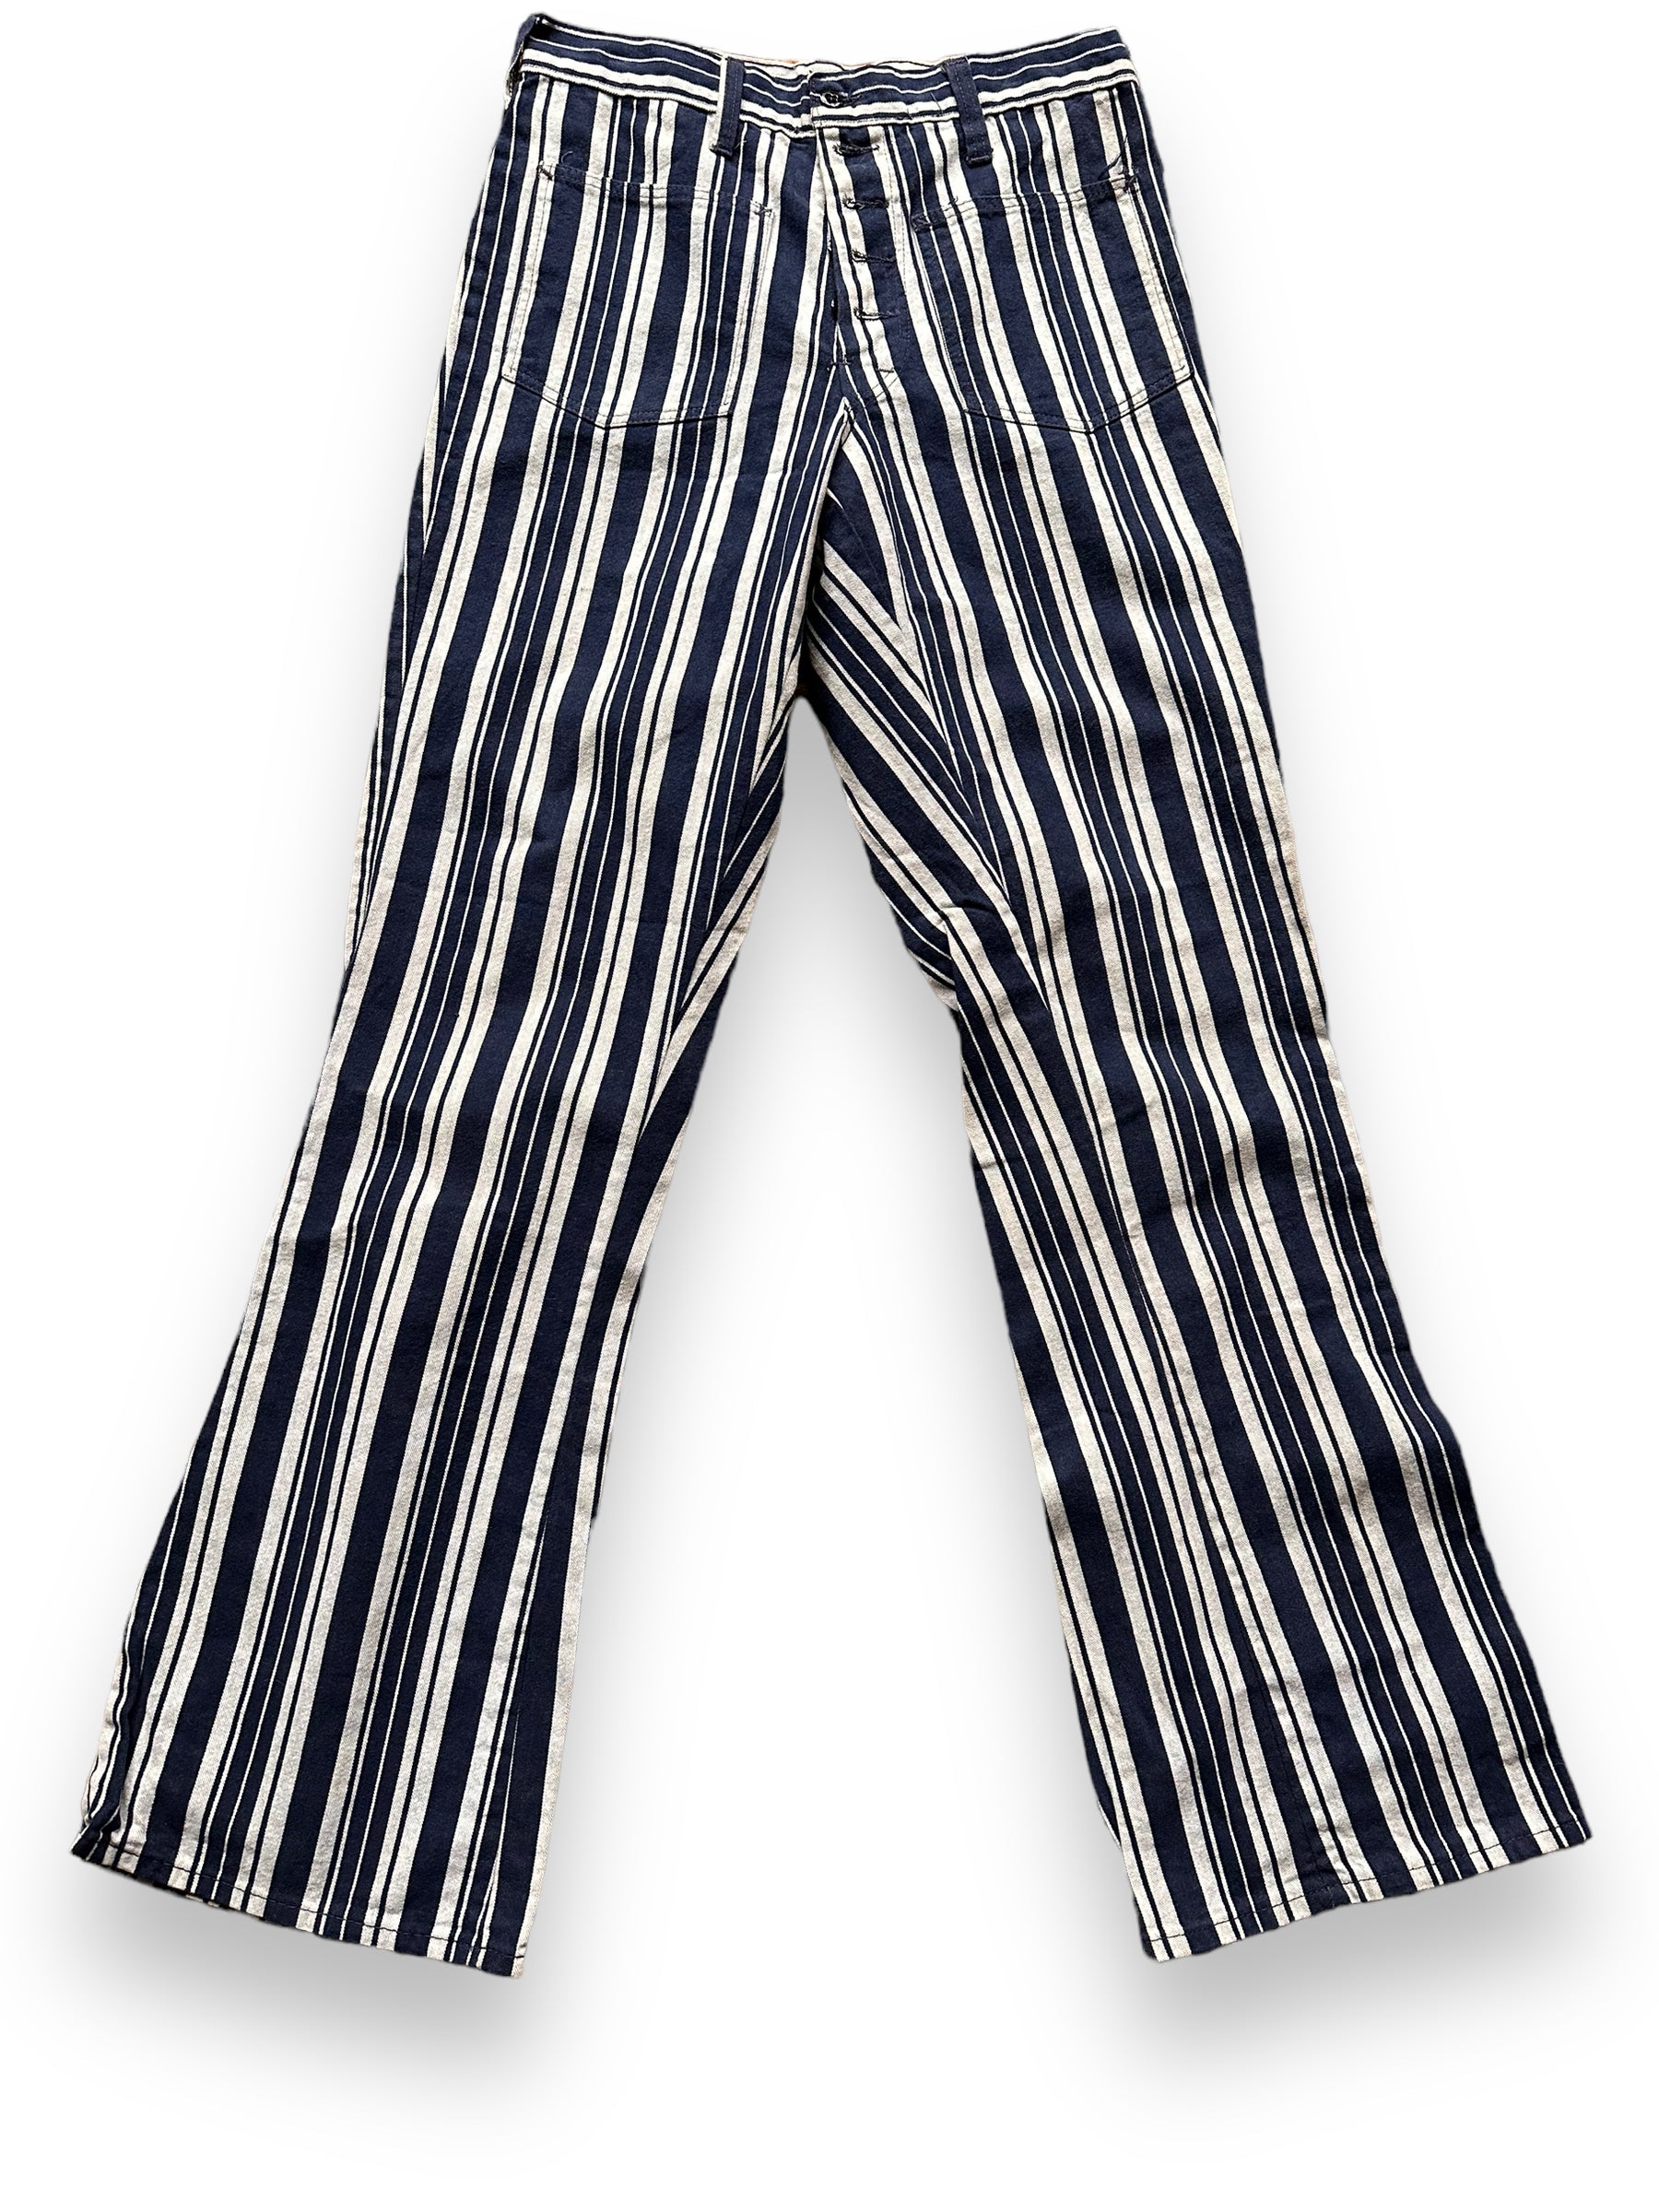 Front View of Vintage Jaggeresque Striped Flares W29 | Vintage Bellbottoms Seattle | Barn Owl Vintage Clothing